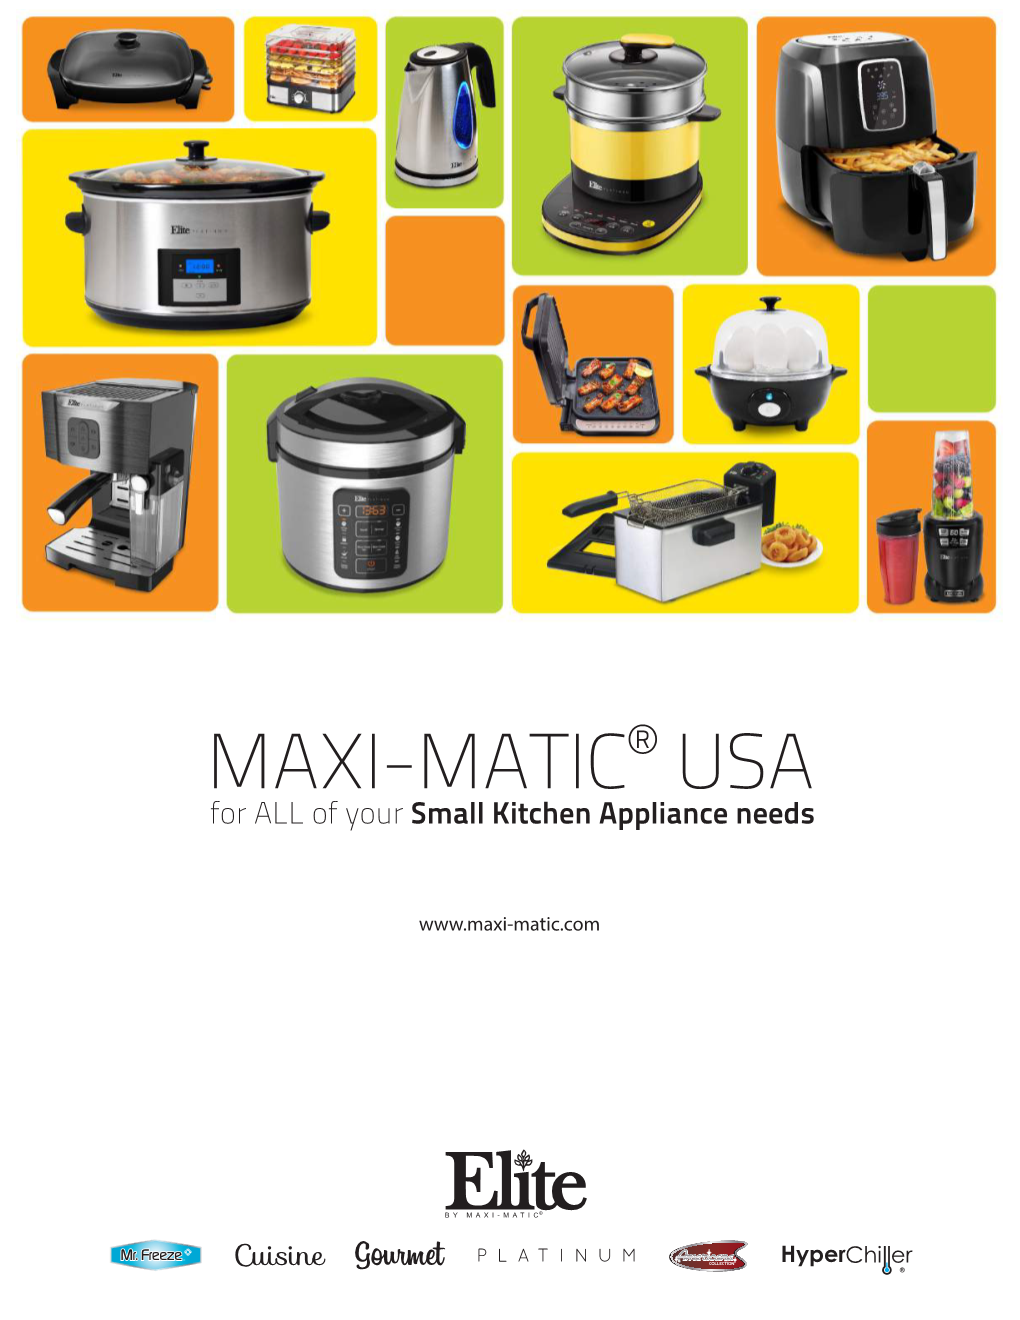 MAXI-MATIC® USA for ALL of Your Small Kitchen Appliance Needs